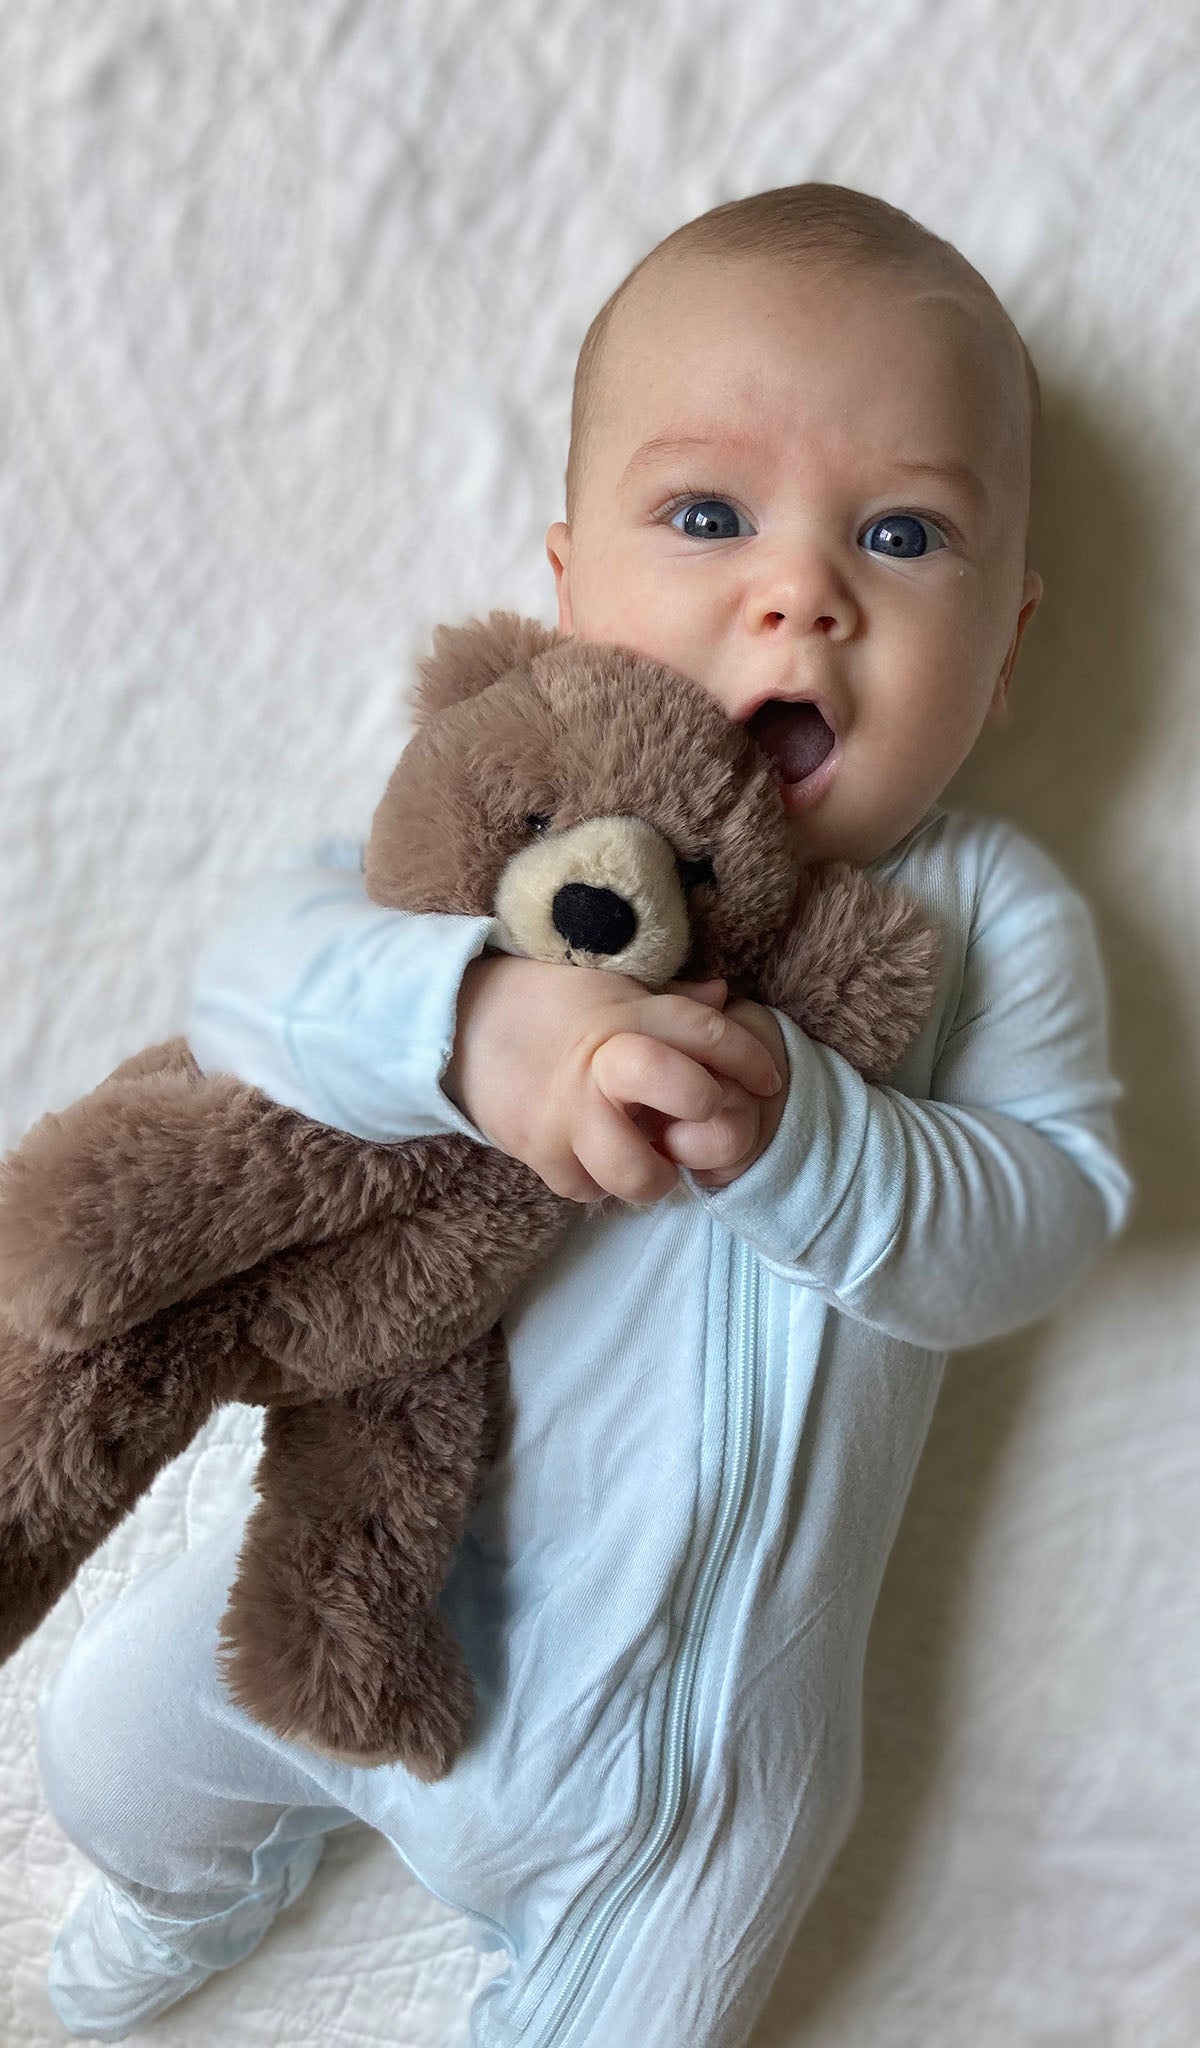 Whispering Blue Footie worn by baby holding teddy bear.